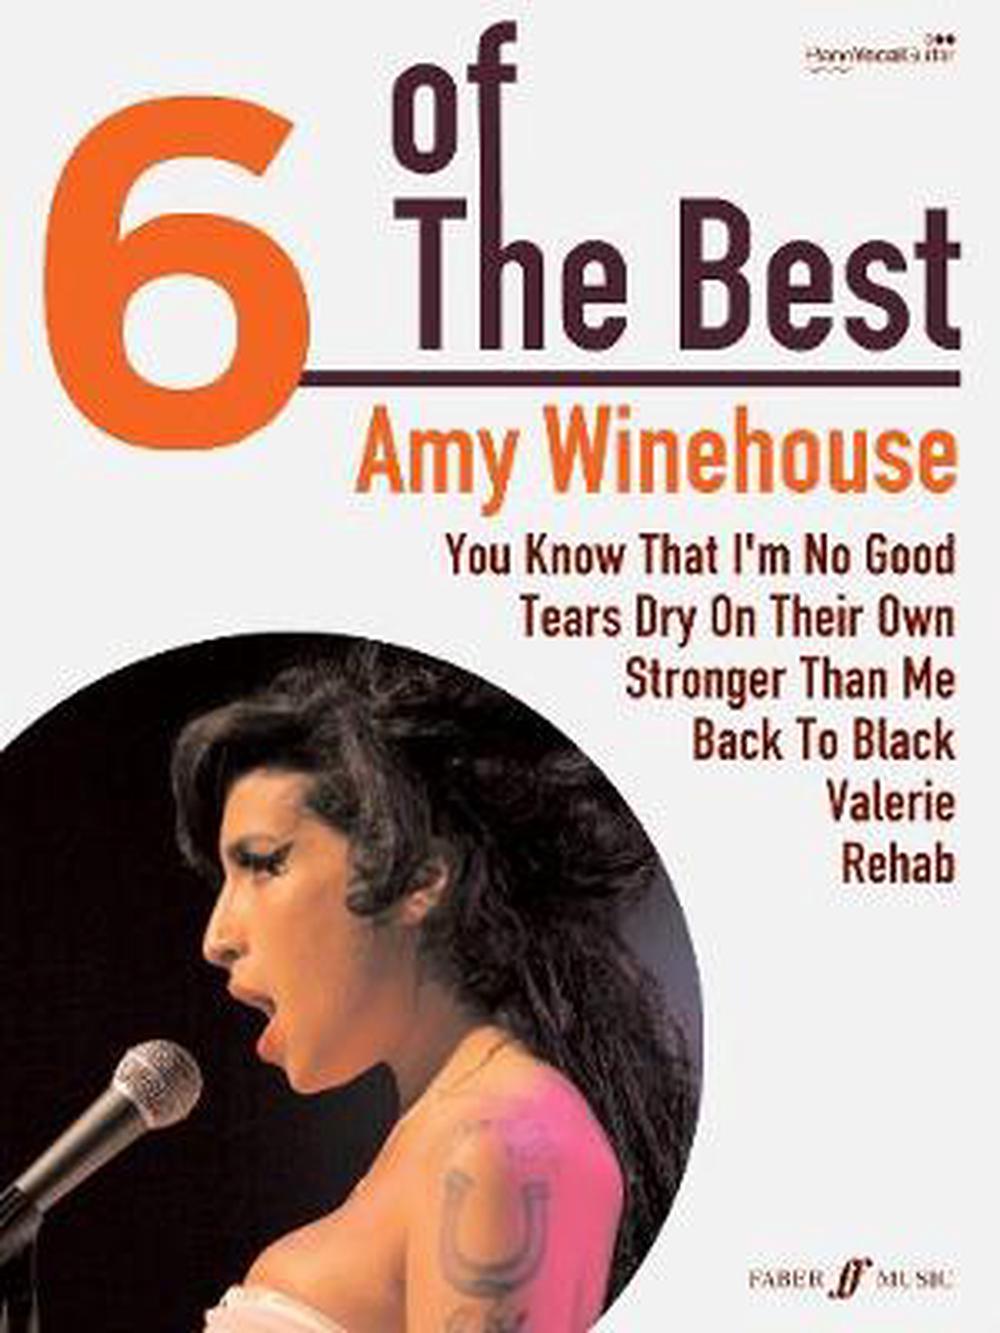 6 of the Best by Amy Winehouse Paperback Book Free Shipping